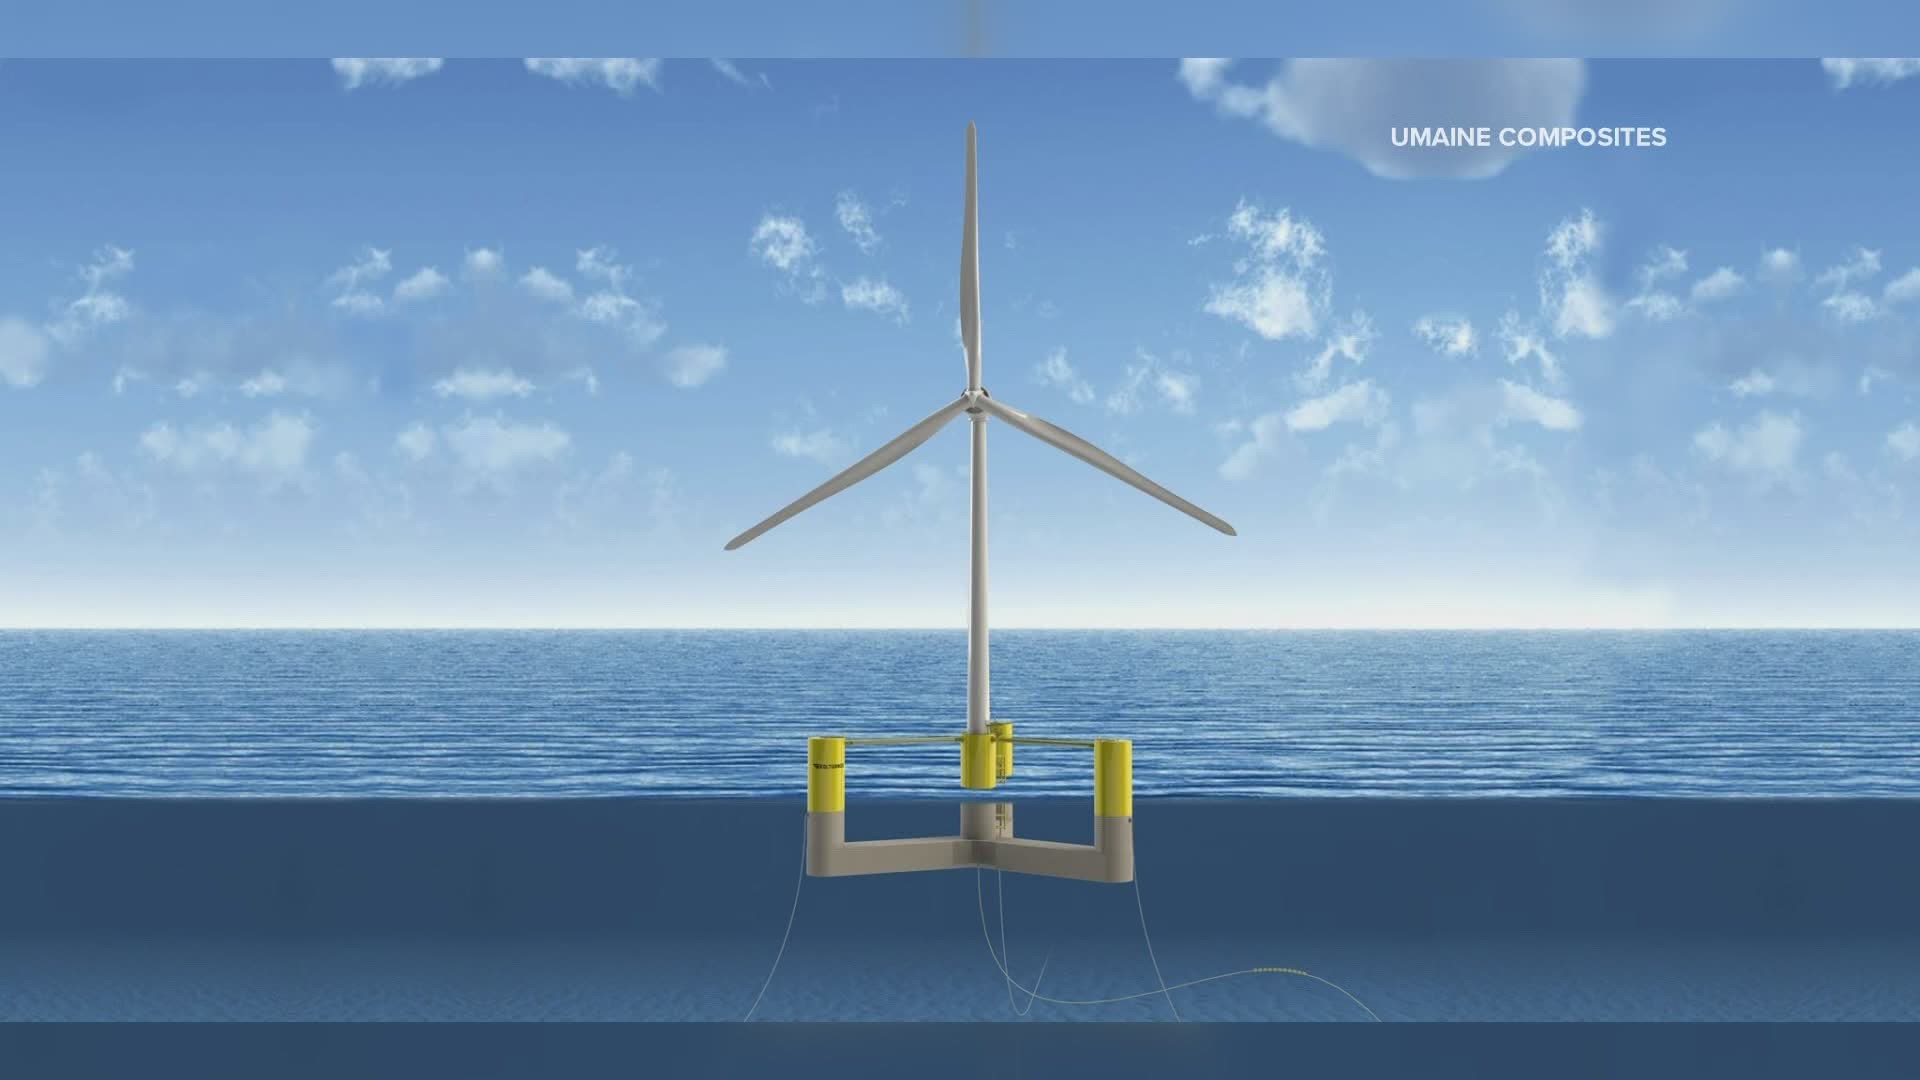 The University of Maine's Advanced Structures and Composites Center will be part of a team to build and evaluate an offshore wind platform.